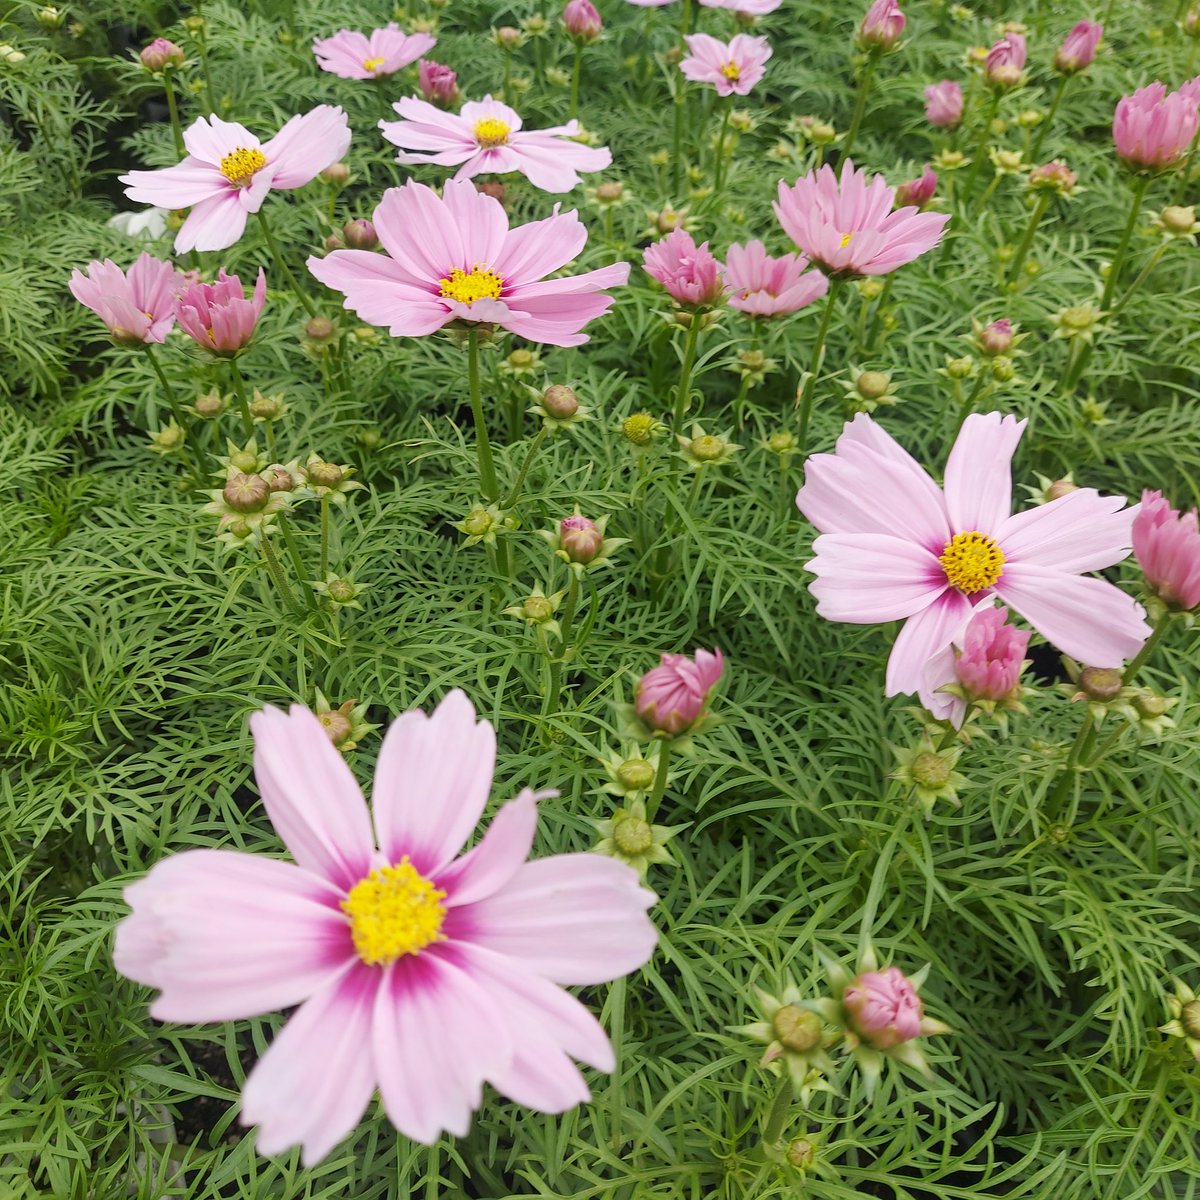 Cosmos 😍😍😍 I took these at work earlier today 🤍🩷